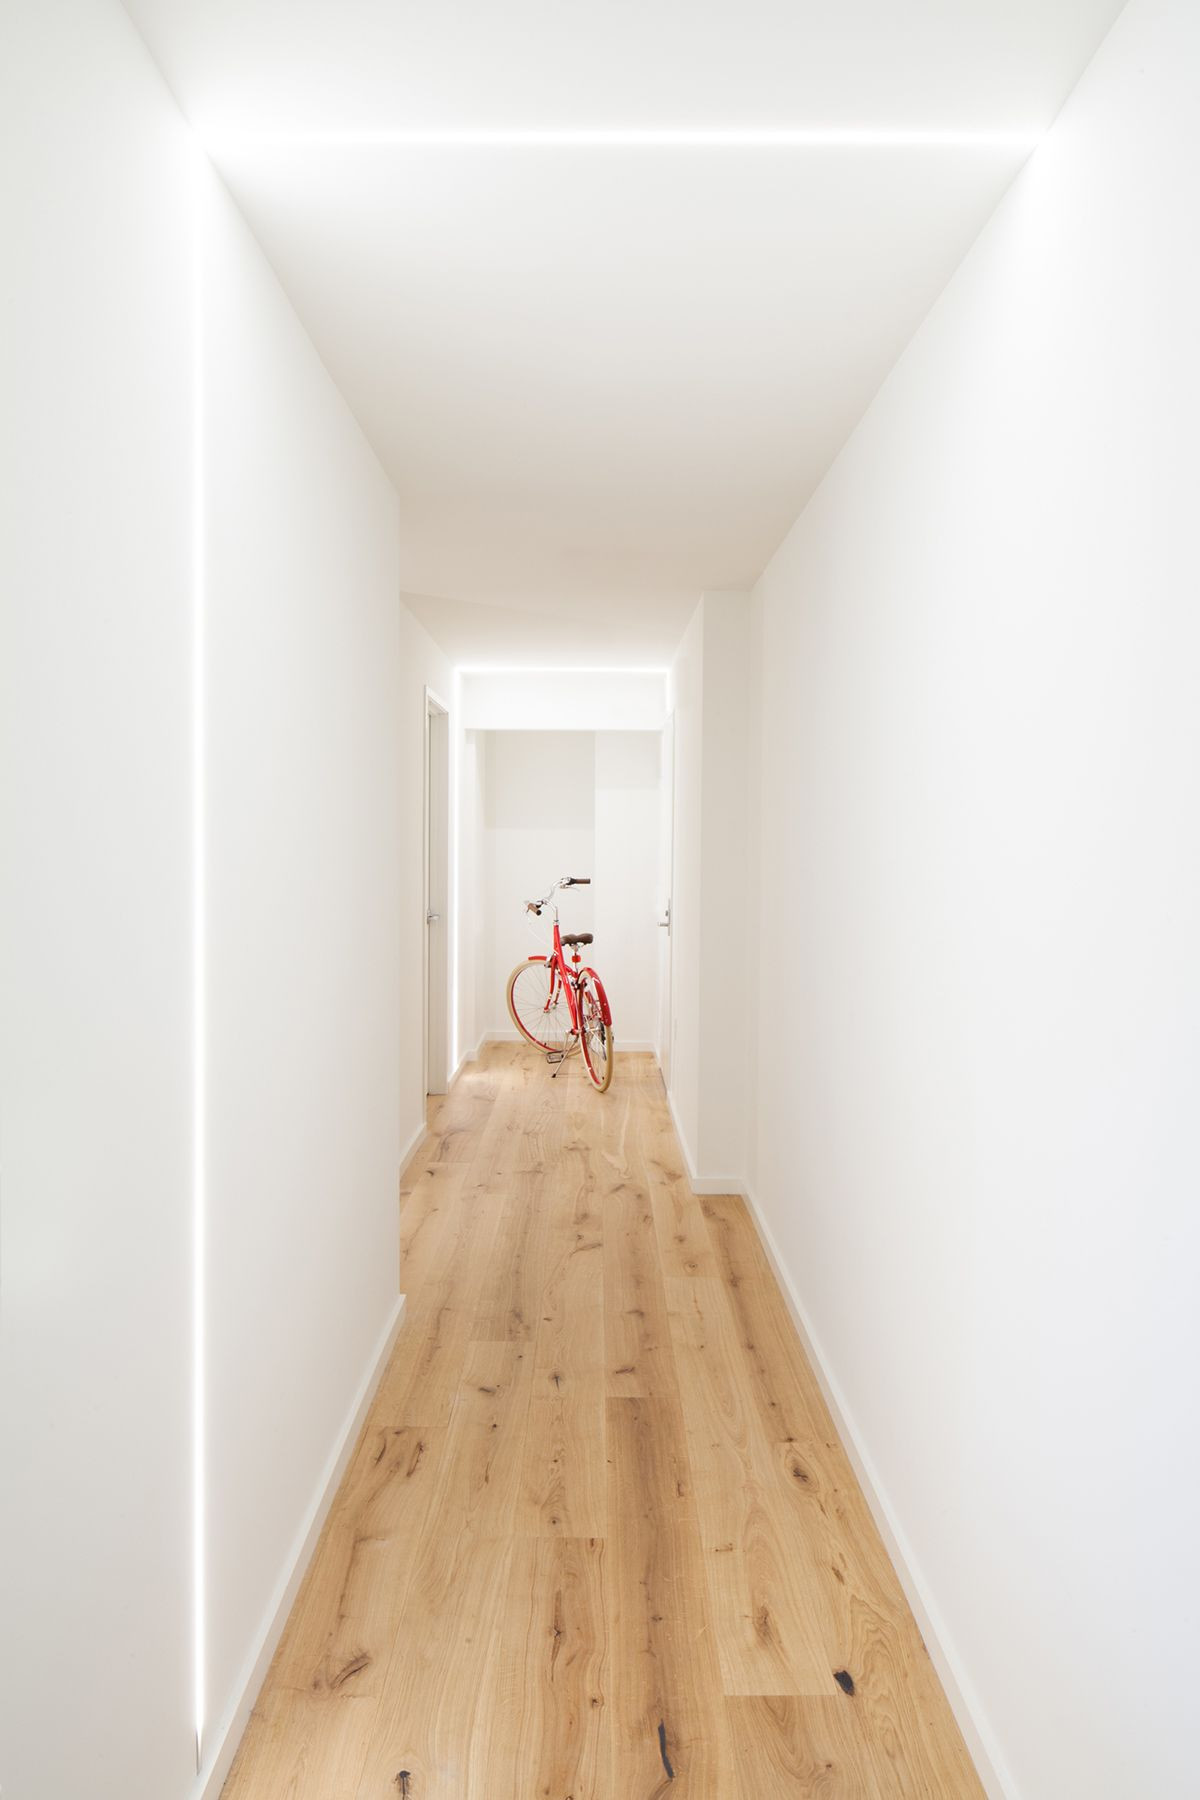 20 Ideal Rustic Wide Plank Engineered Hardwood Flooring 2024 free download rustic wide plank engineered hardwood flooring of 400 grove in san francisco wide plank rustic oak floors with a within 400 grove in san francisco wide plank rustic oak floors with a natural